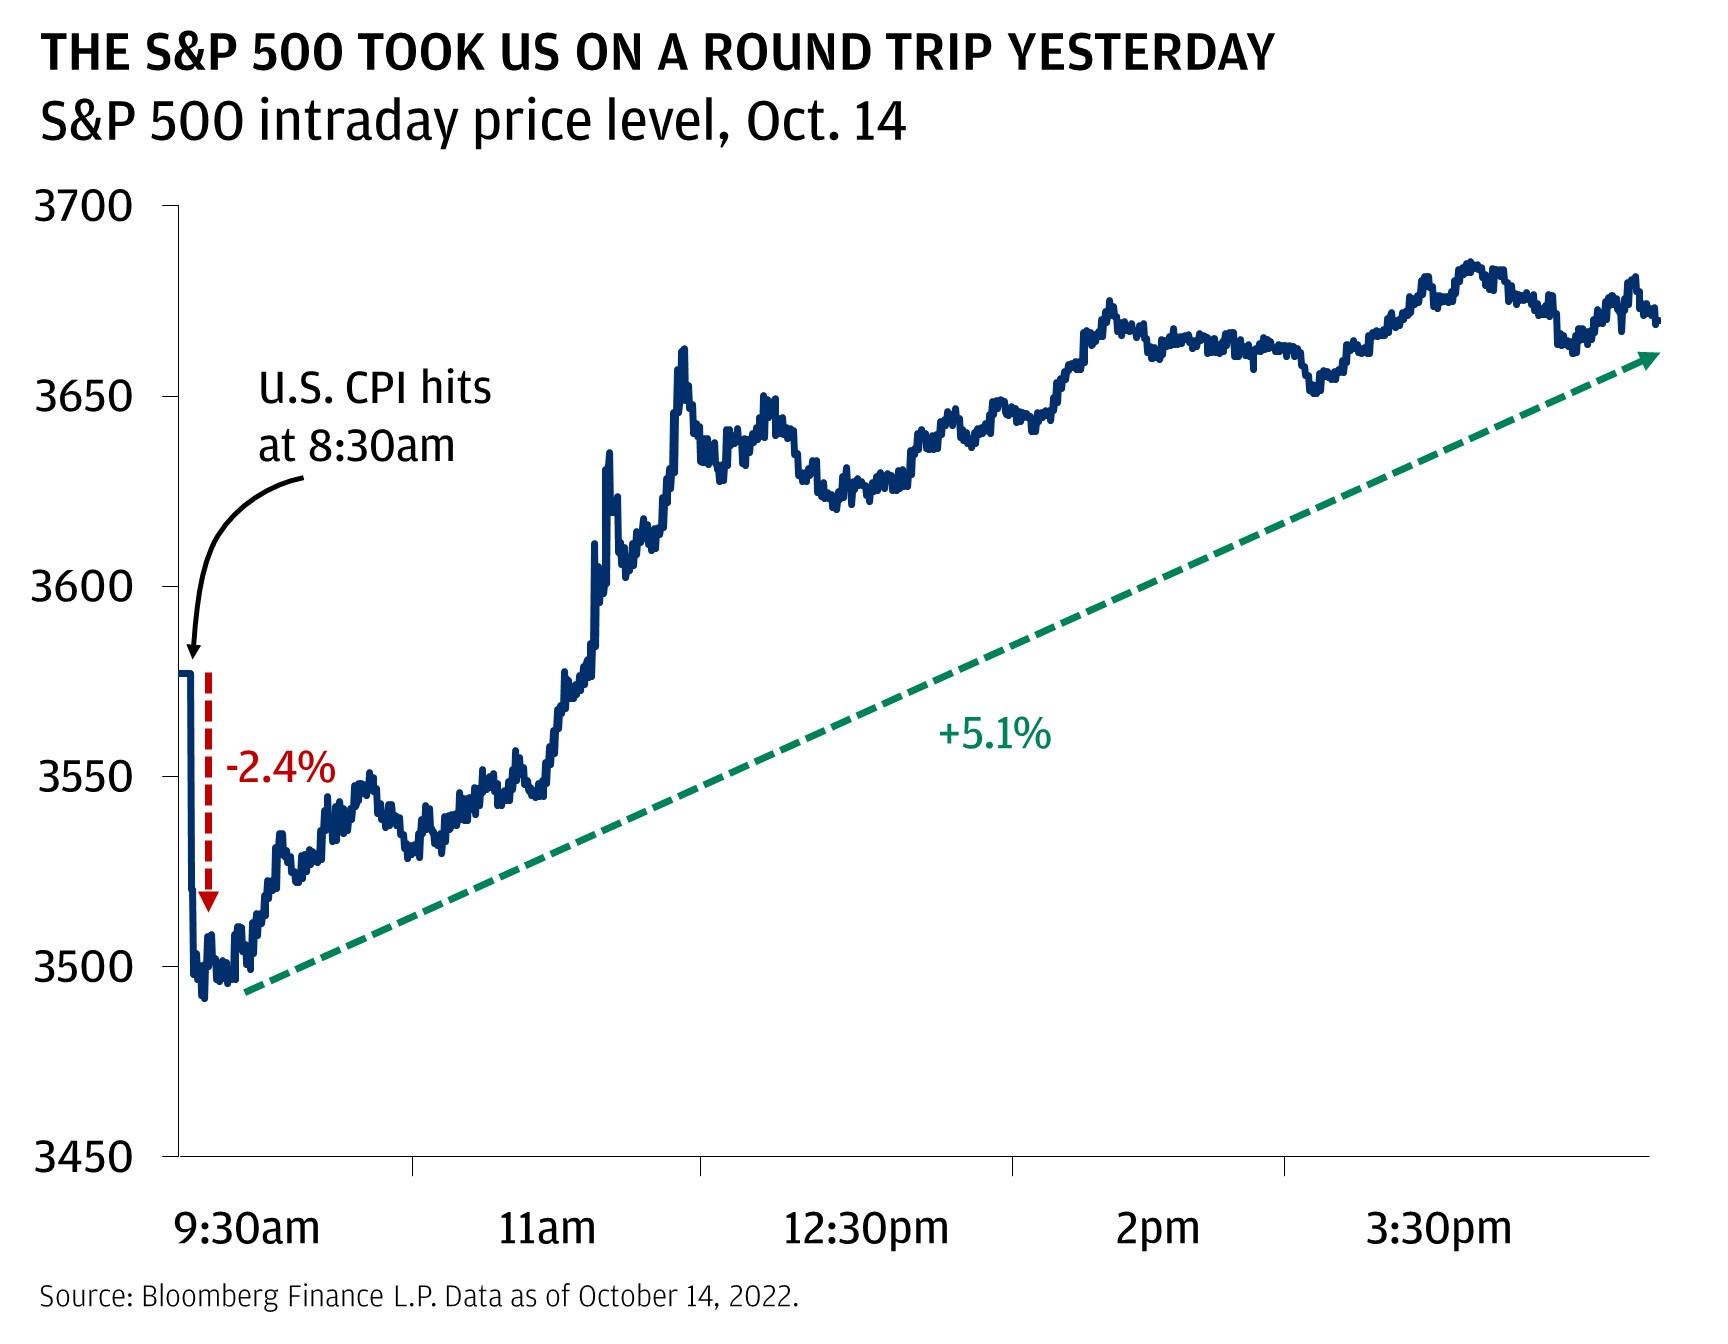 This chart shows the intraday S&P 500 Index level on October 14, 2022.